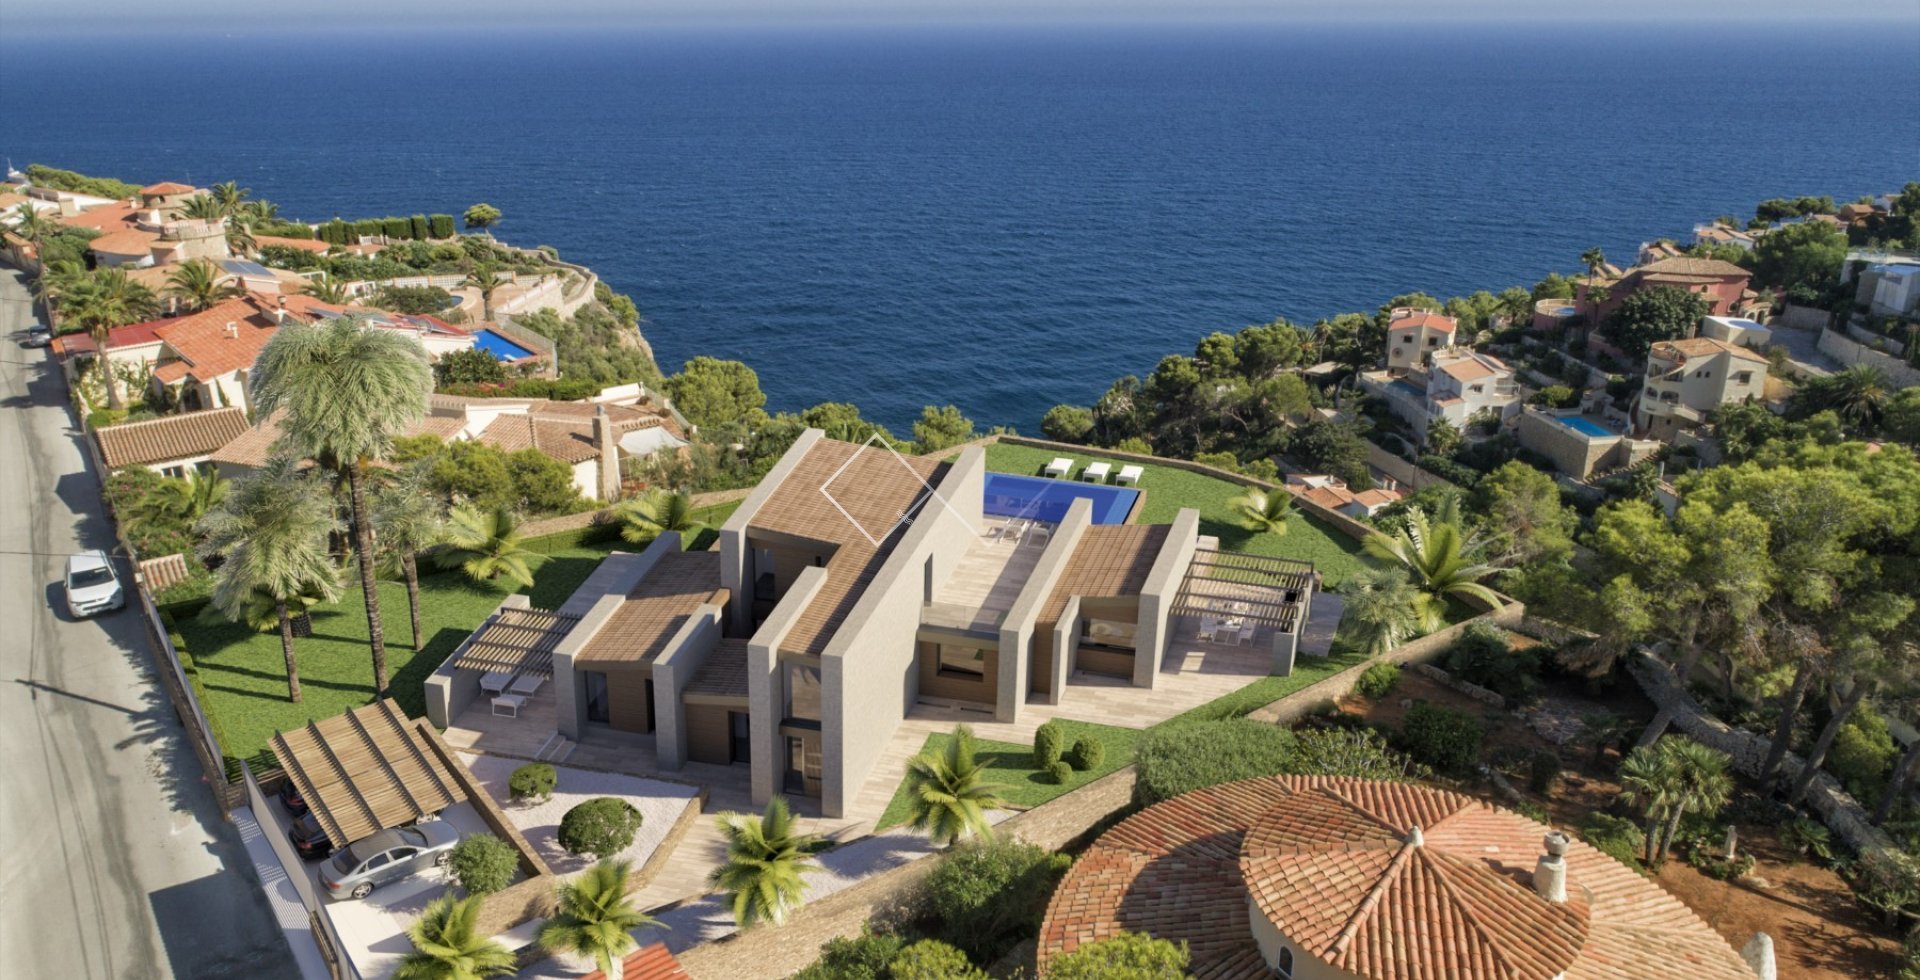 sea views - Finished project. Luxurious sea view villa in Javea